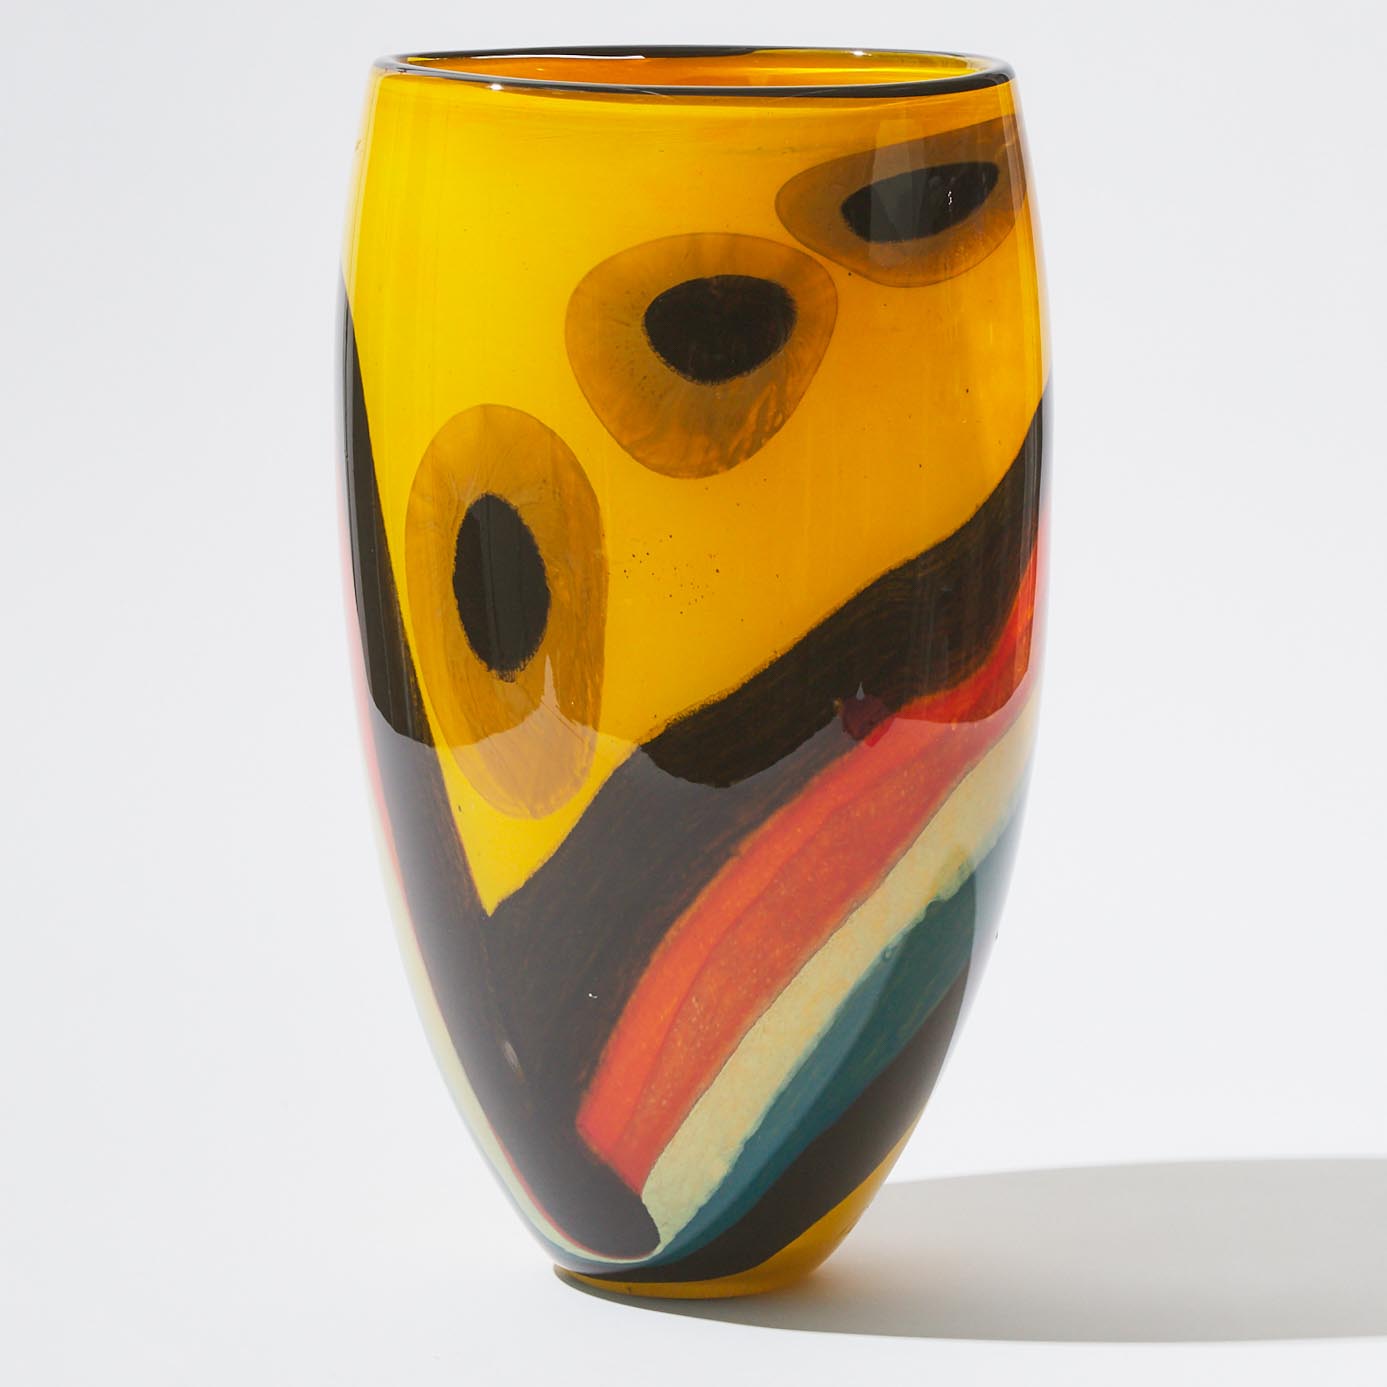 Large Internally Decorated Glass Vase, probably North American, late 20th century